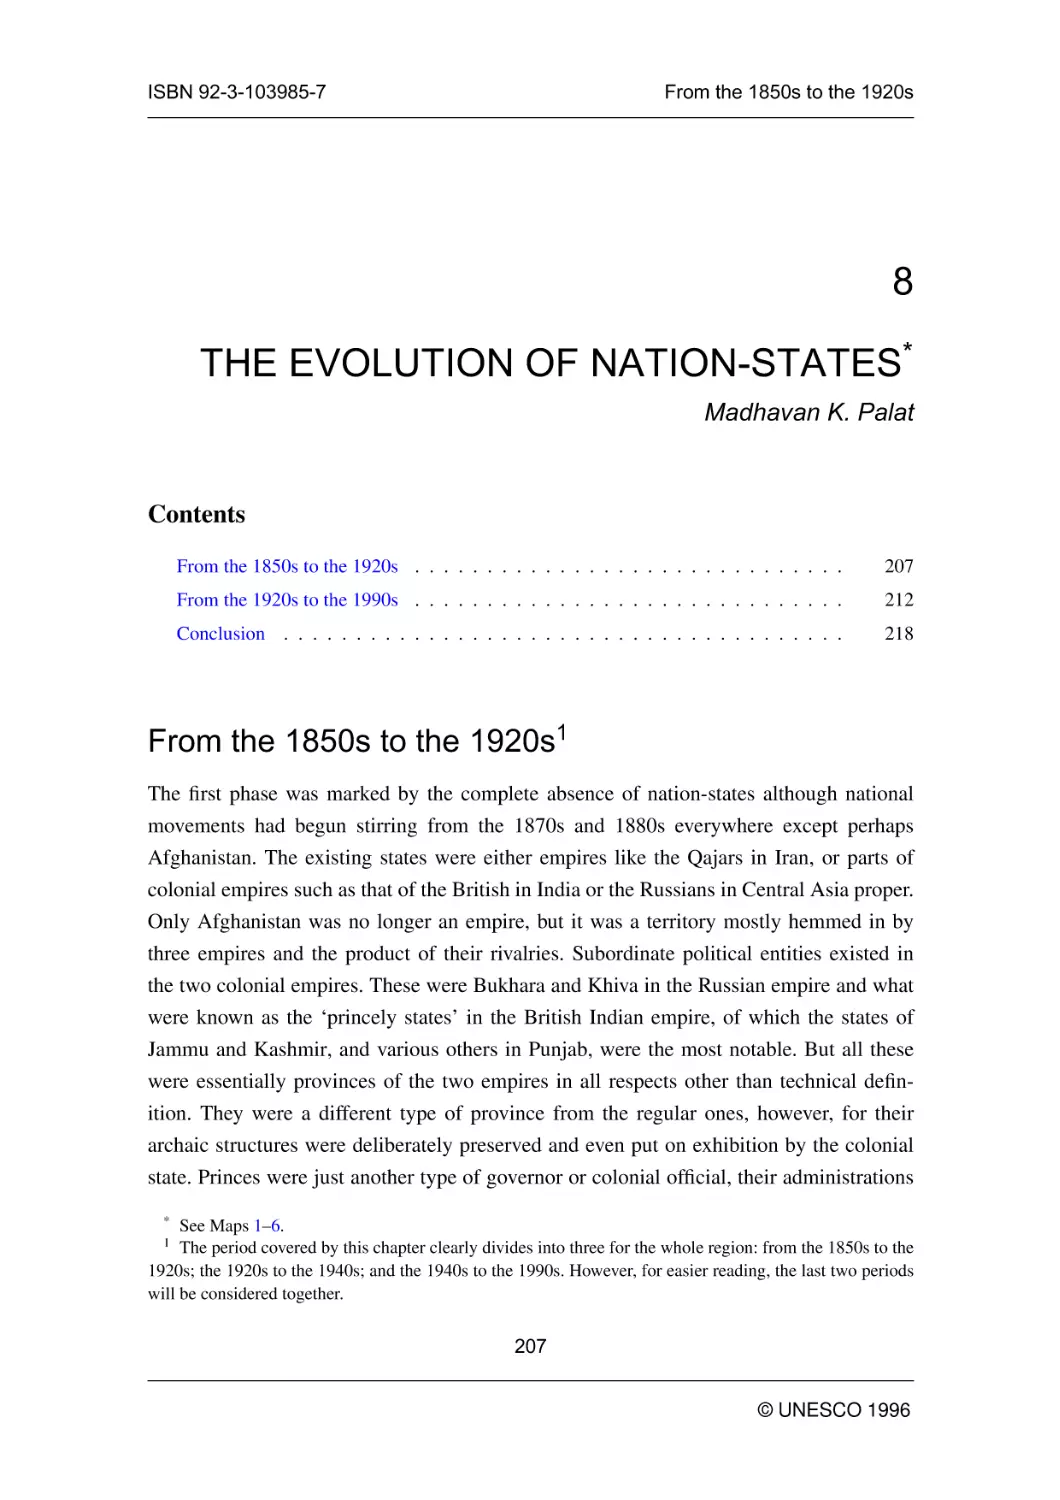 THE EVOLUTION OF NATION-STATES